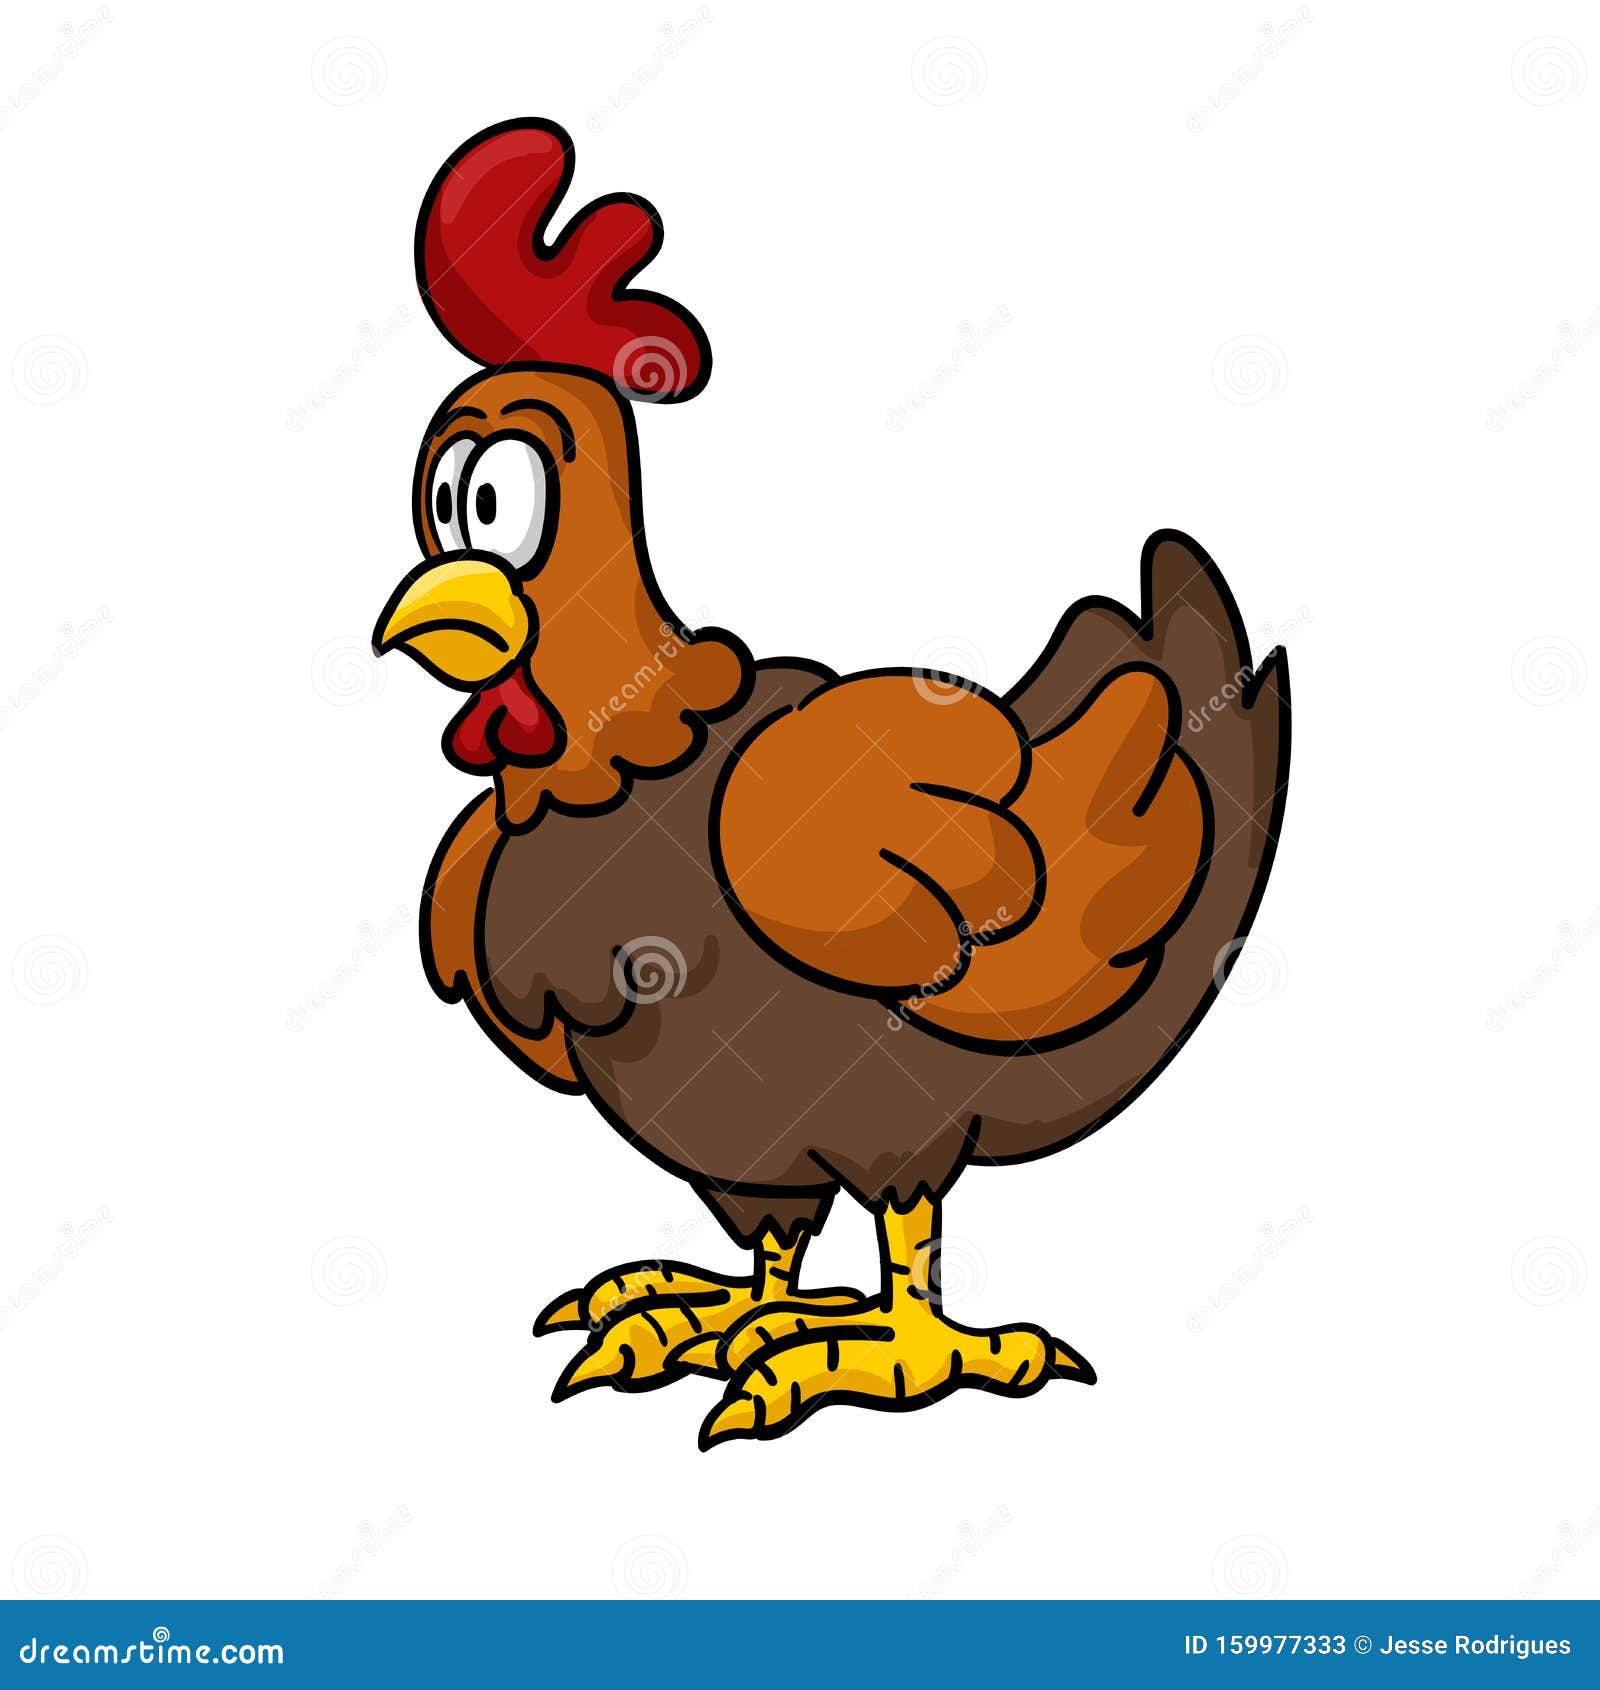 Cartoon Chicken. Vector Clip Art Illustration with Simple Gradients. All in  a Single Layer Stock Illustration - Illustration of vector, simple:  159977333